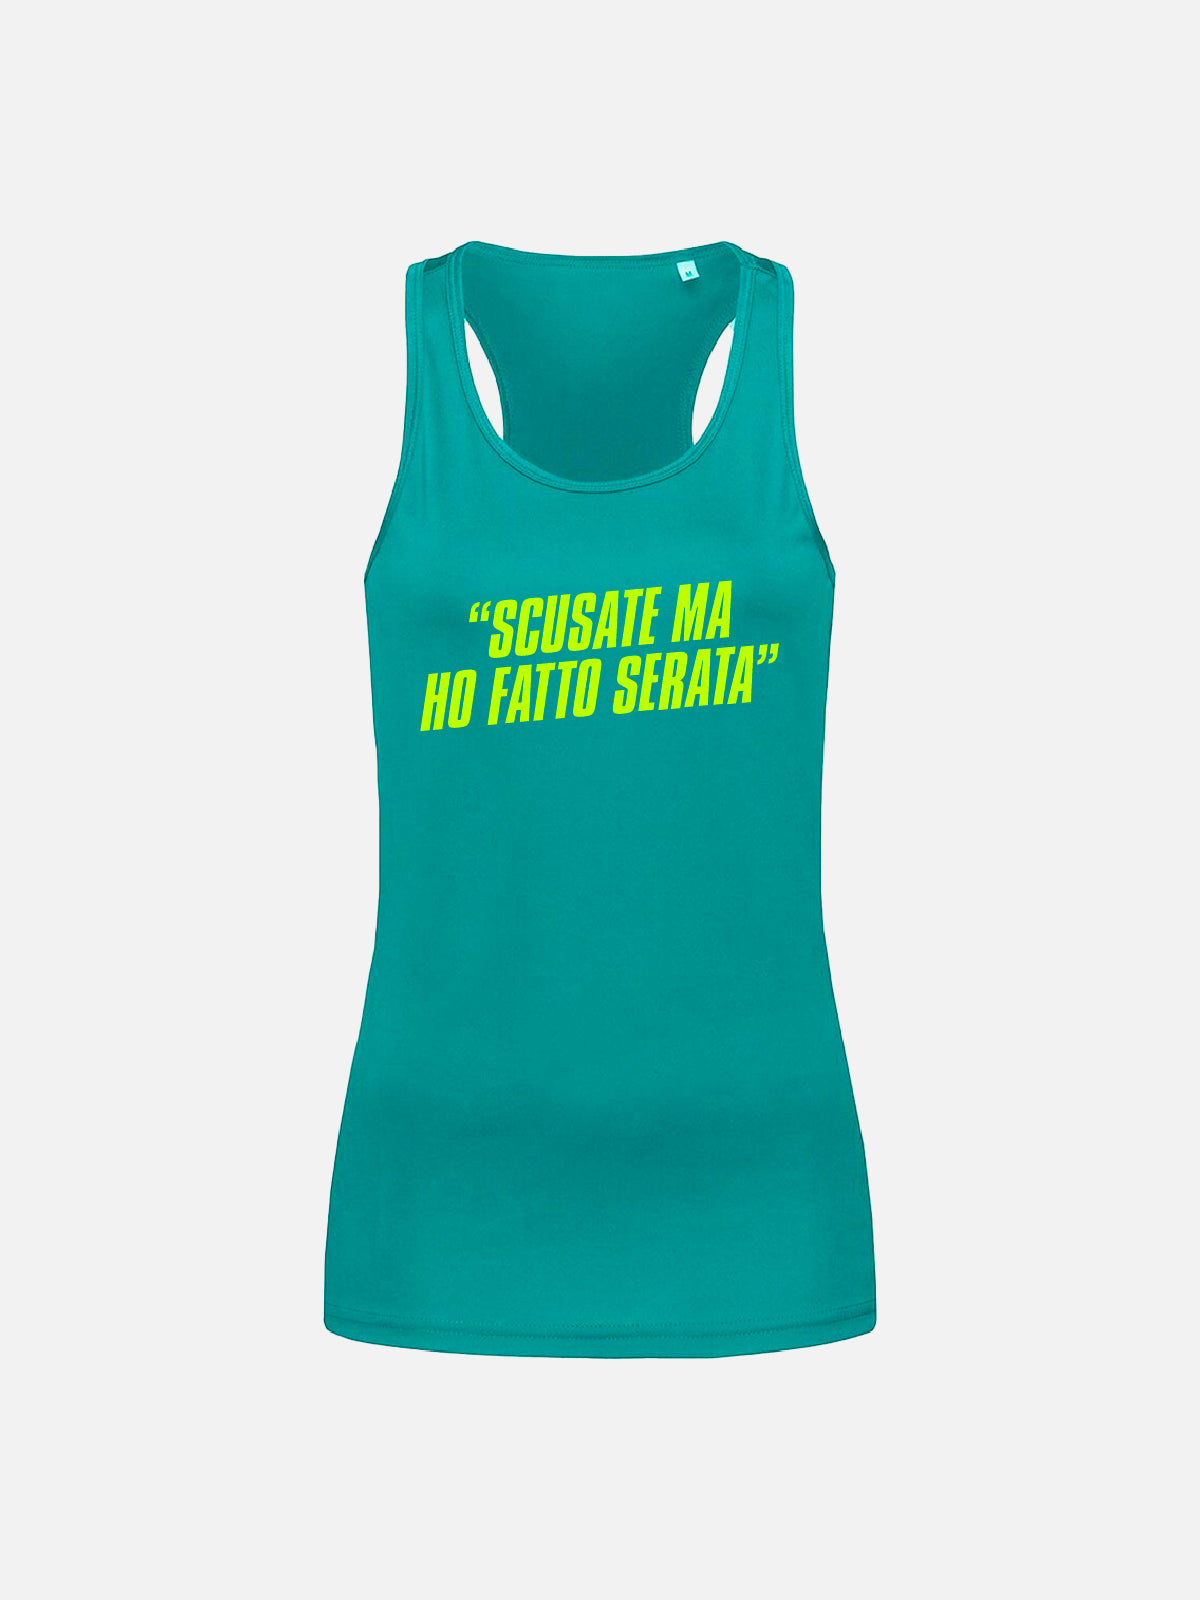 Tank top - “Sorry But I Had a Night Out”